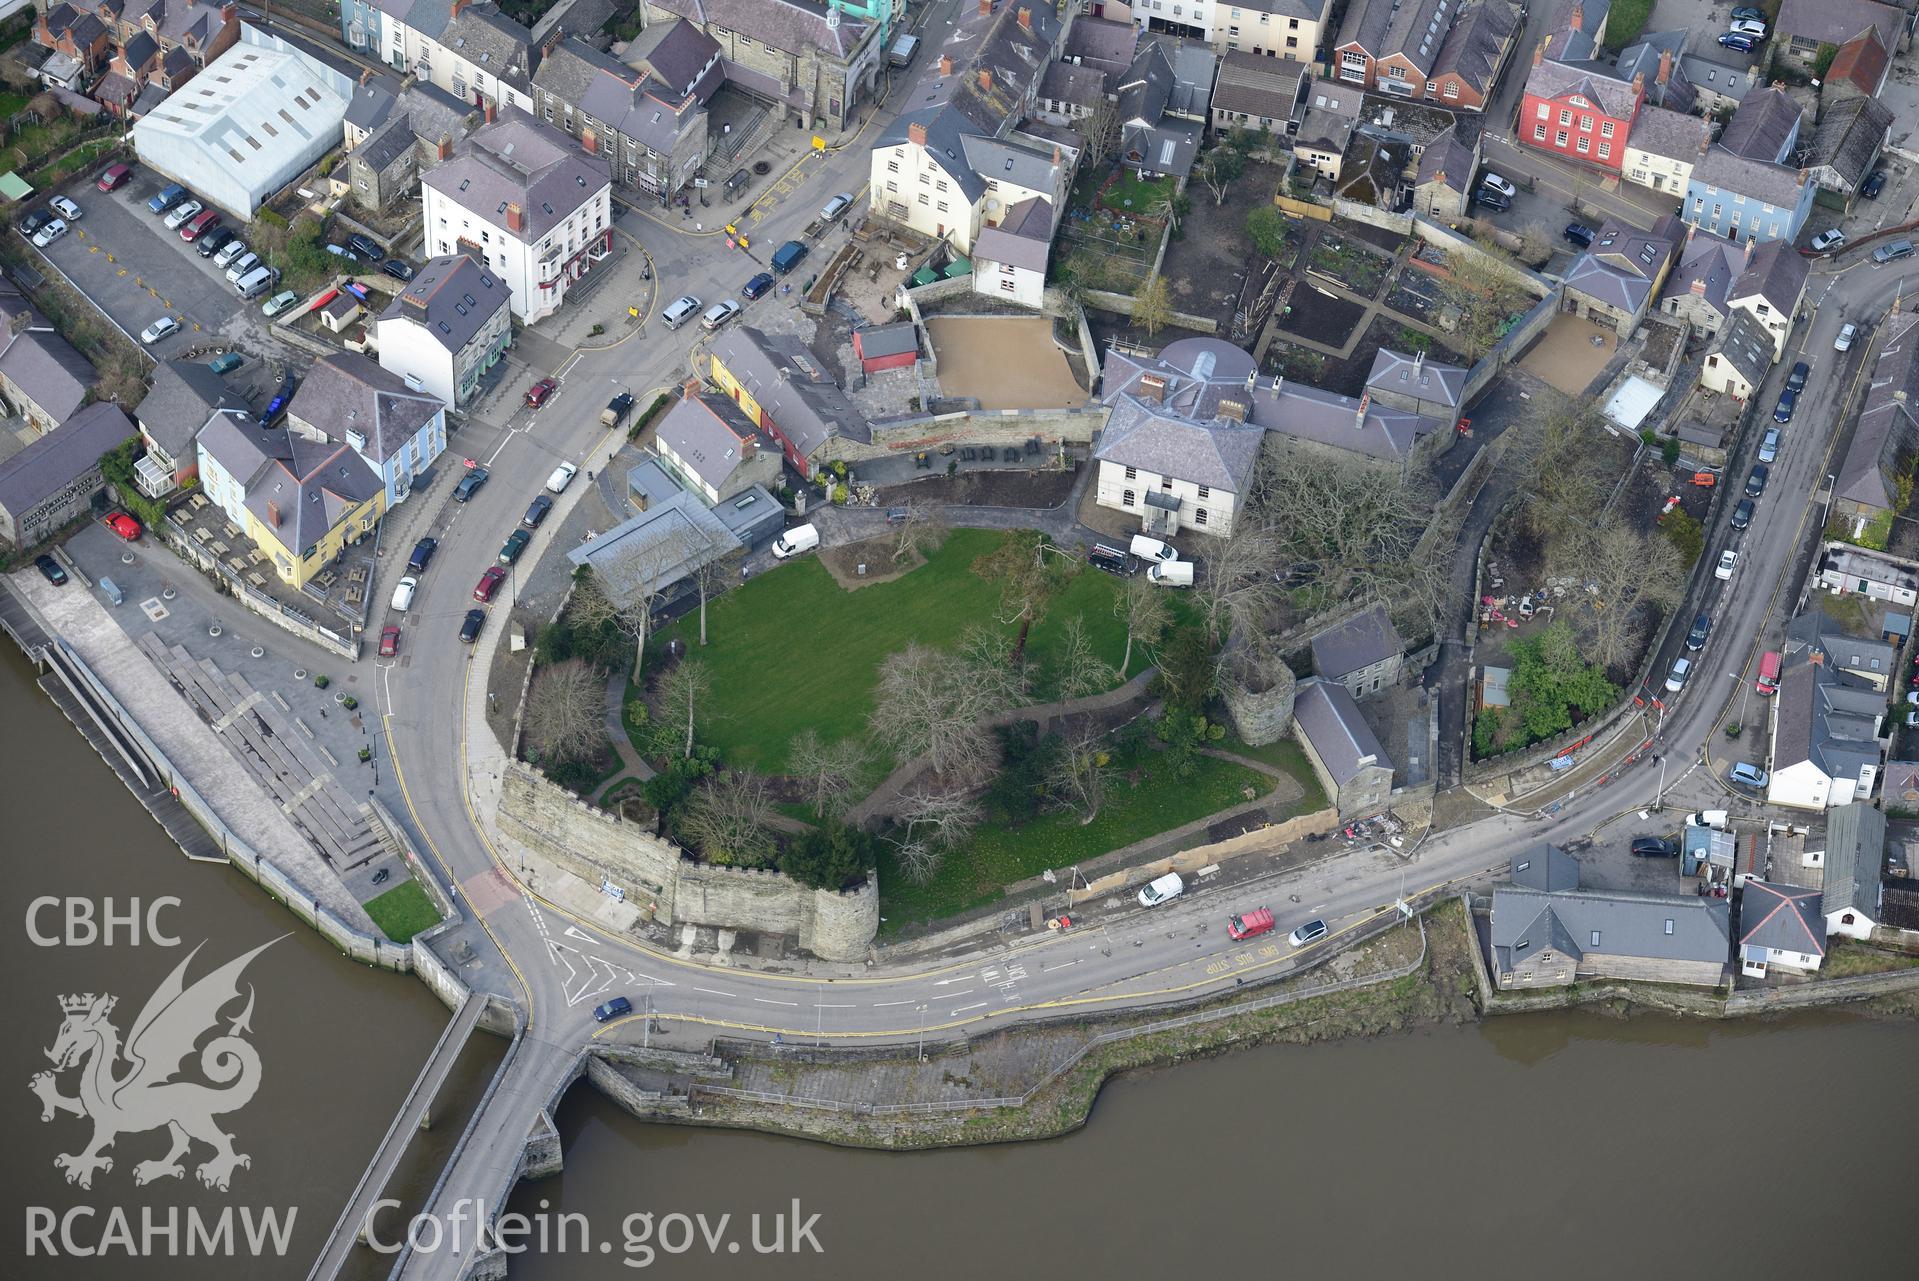 Cardigan bridge; Grovesnor hotel; Cardigan castle, house, garden, cottages, and the pillbox in the castle, Cardigan. Oblique aerial photograph taken during the Royal Commission's programme of archaeological aerial reconnaissance by Toby Driver on 13th March 2015.